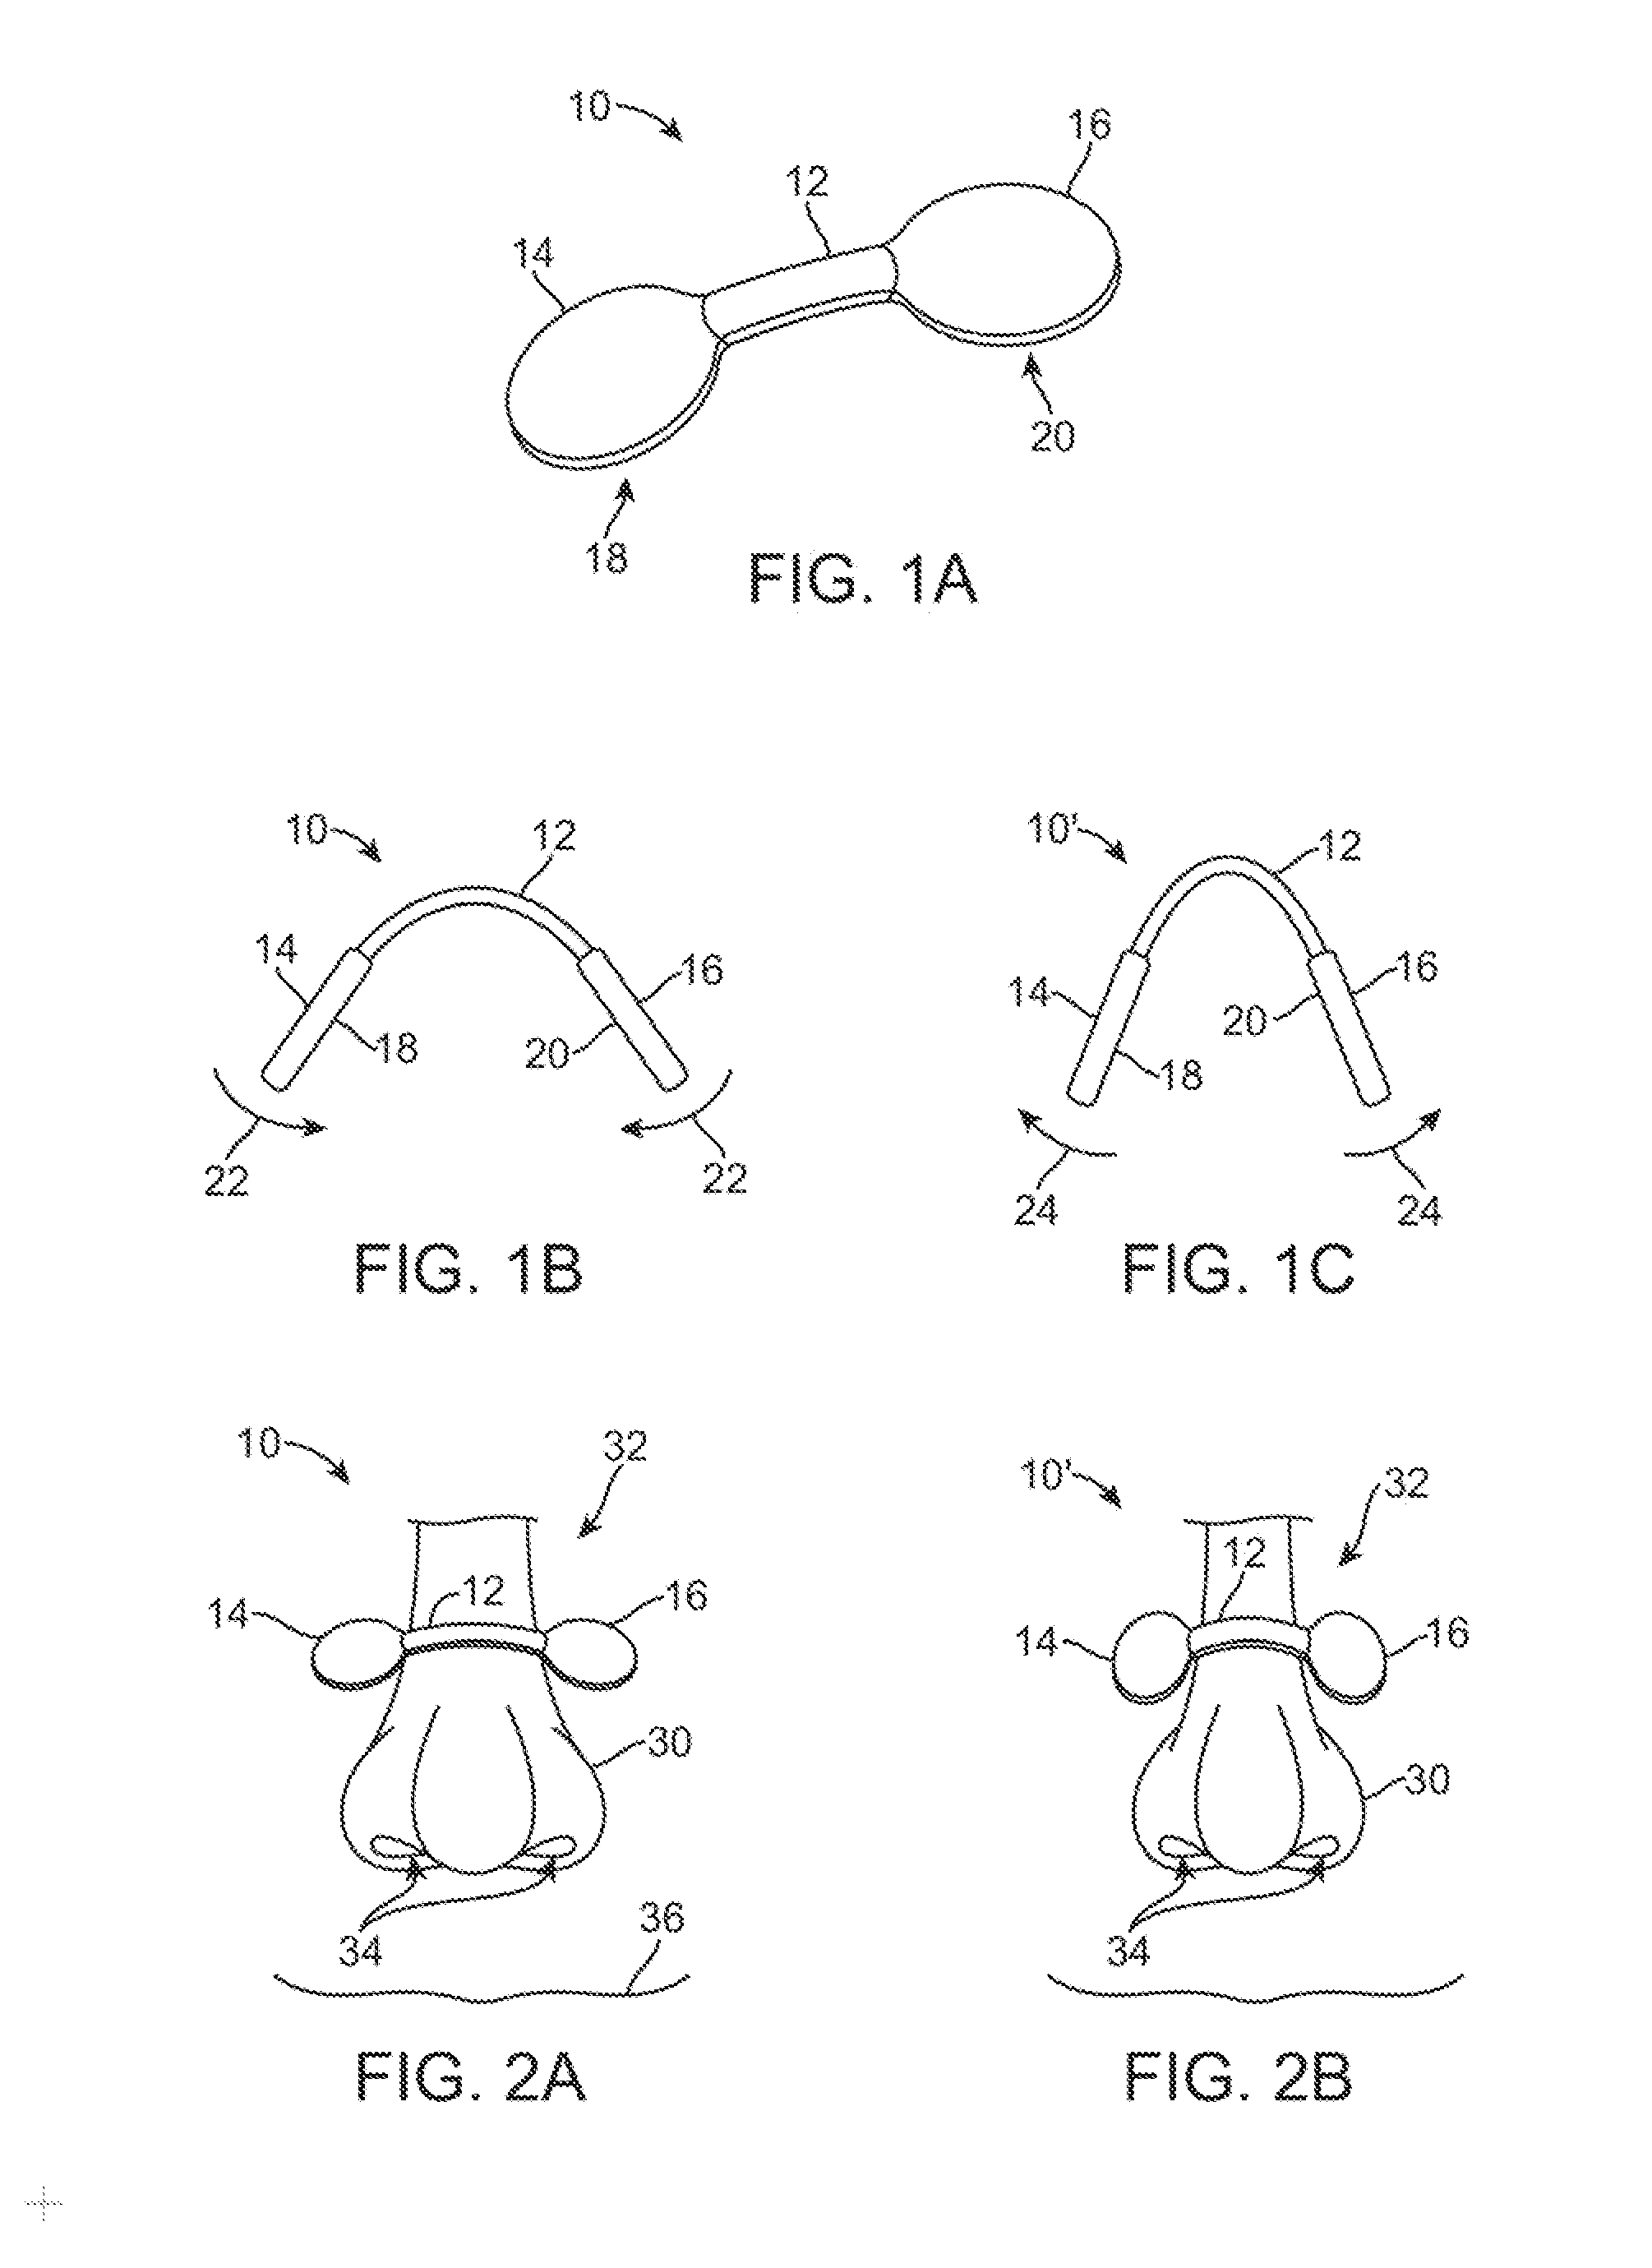 Airflow restriction system